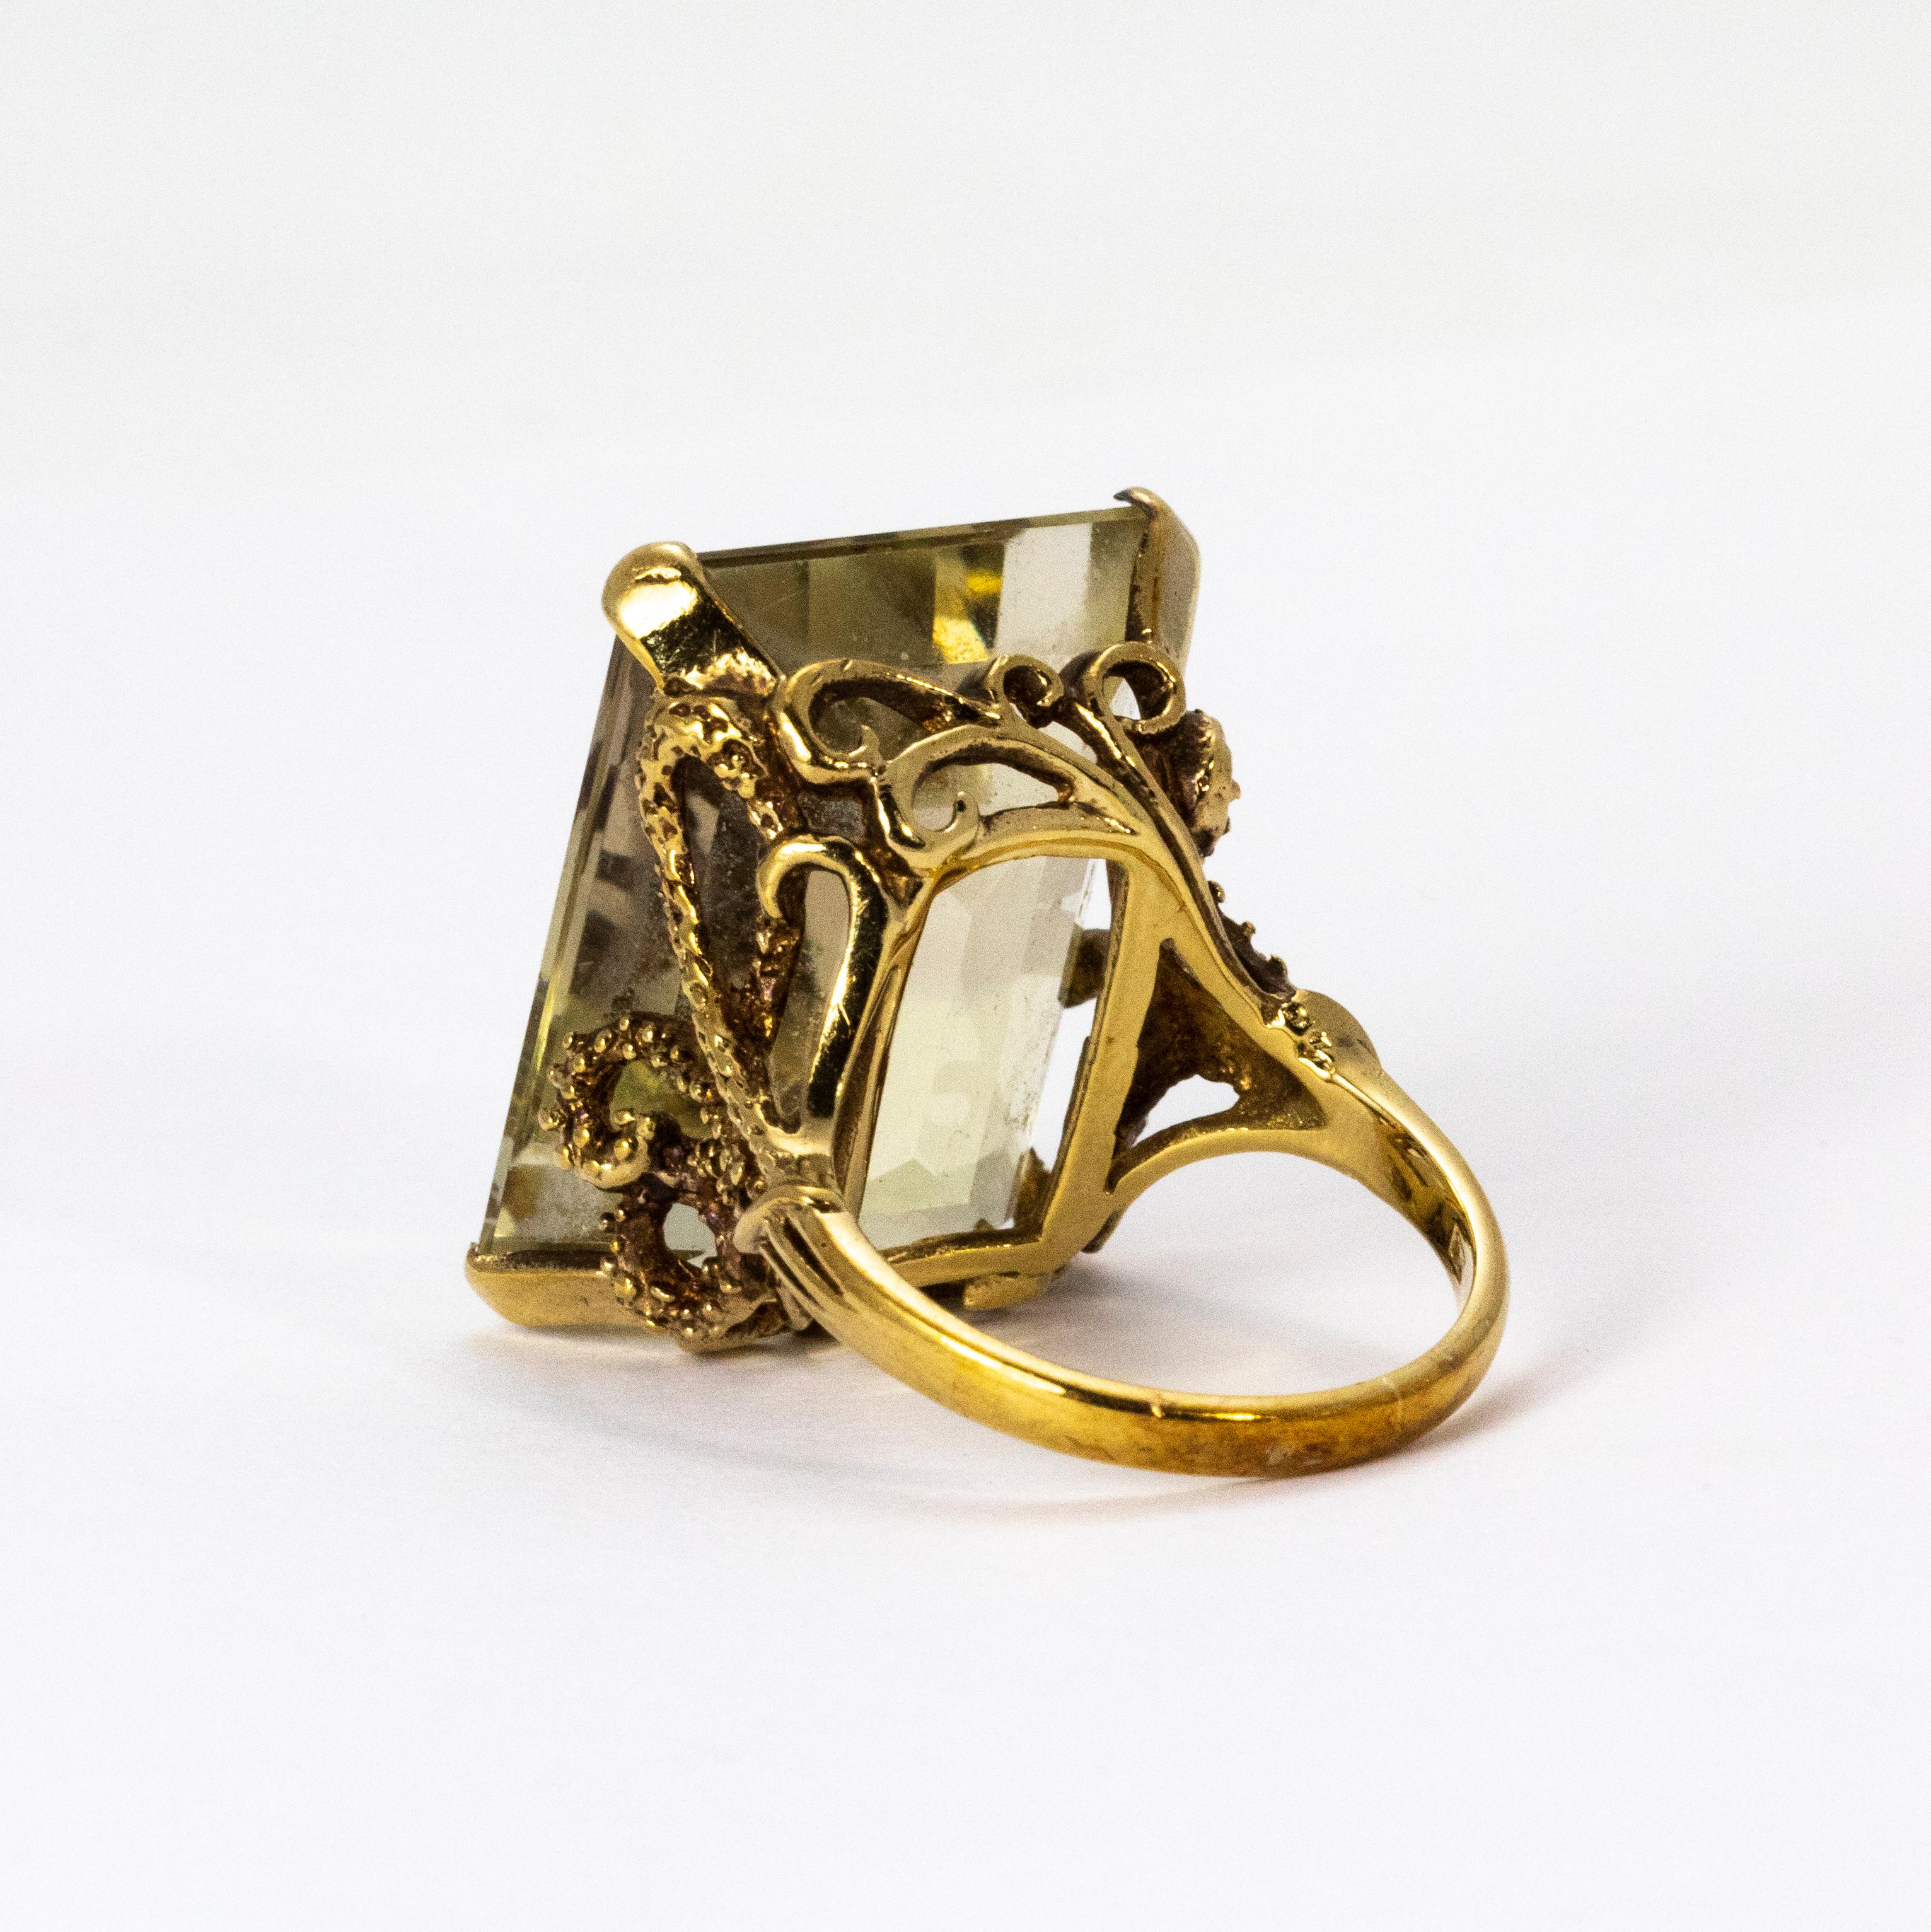 Emerald Cut Large 1940s Gold Citrine Dress Ring with Ornate Gold Shank